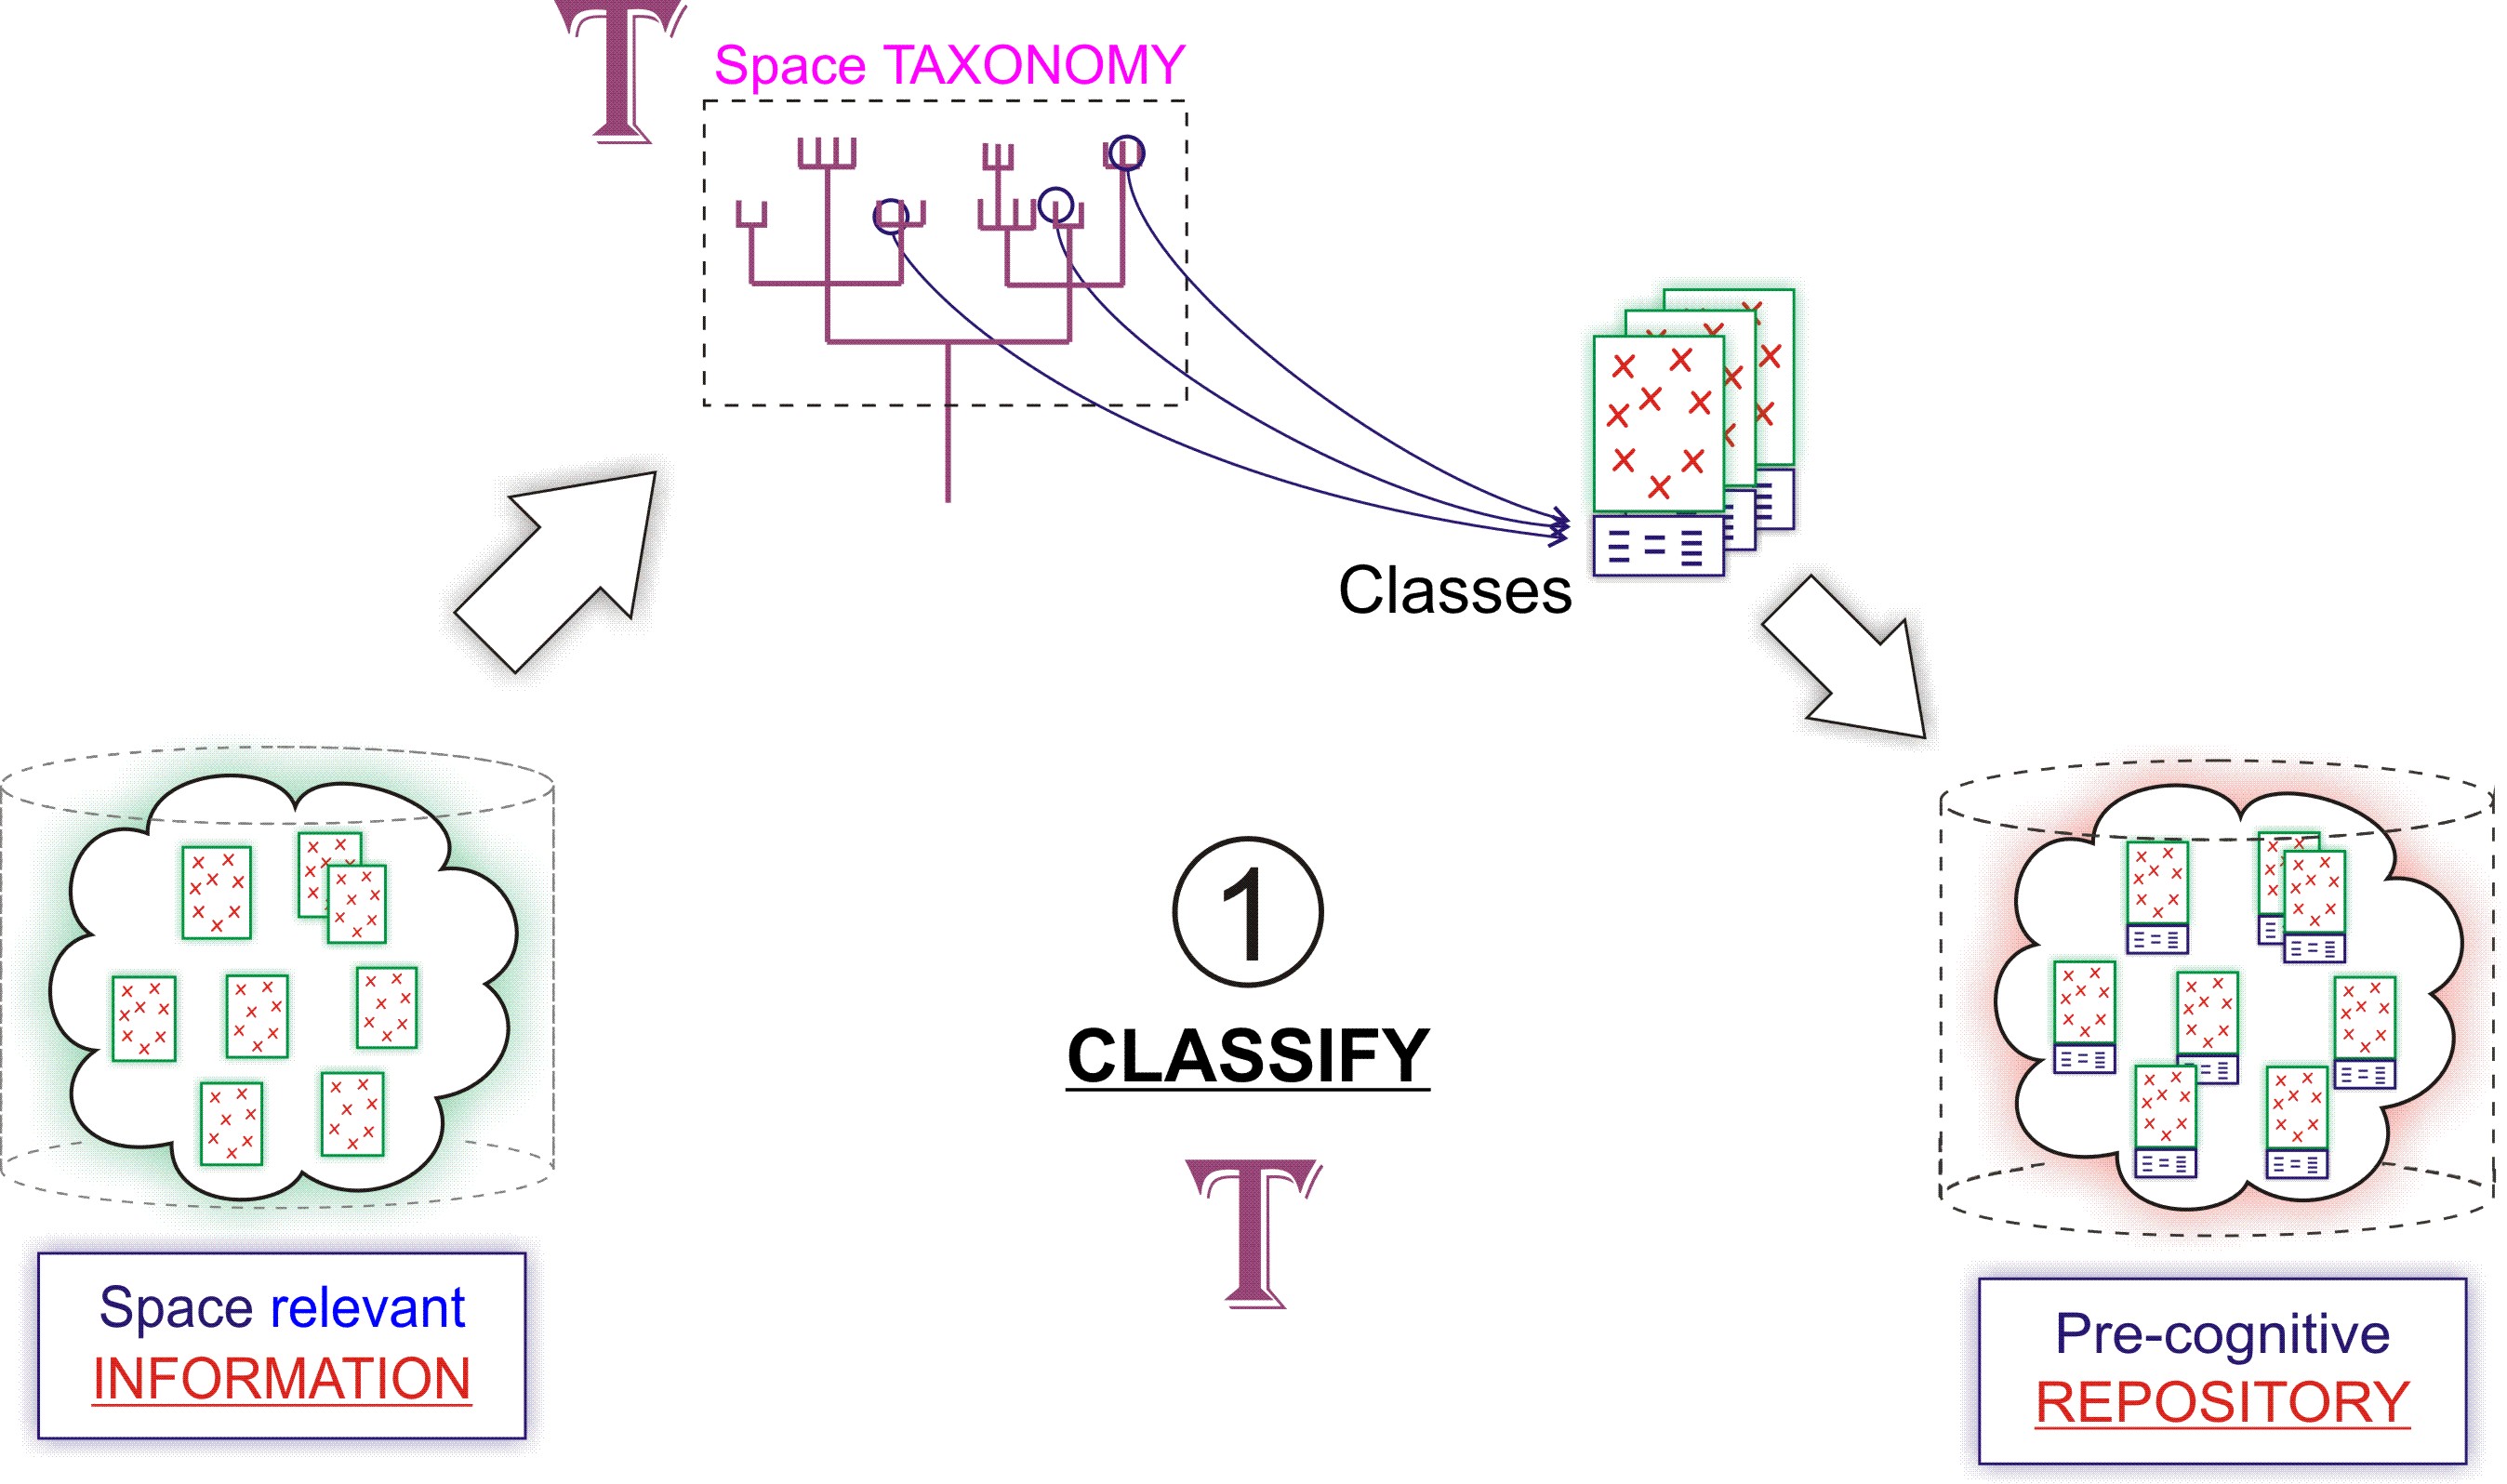 OMPET 6-Taxonomy-Classification